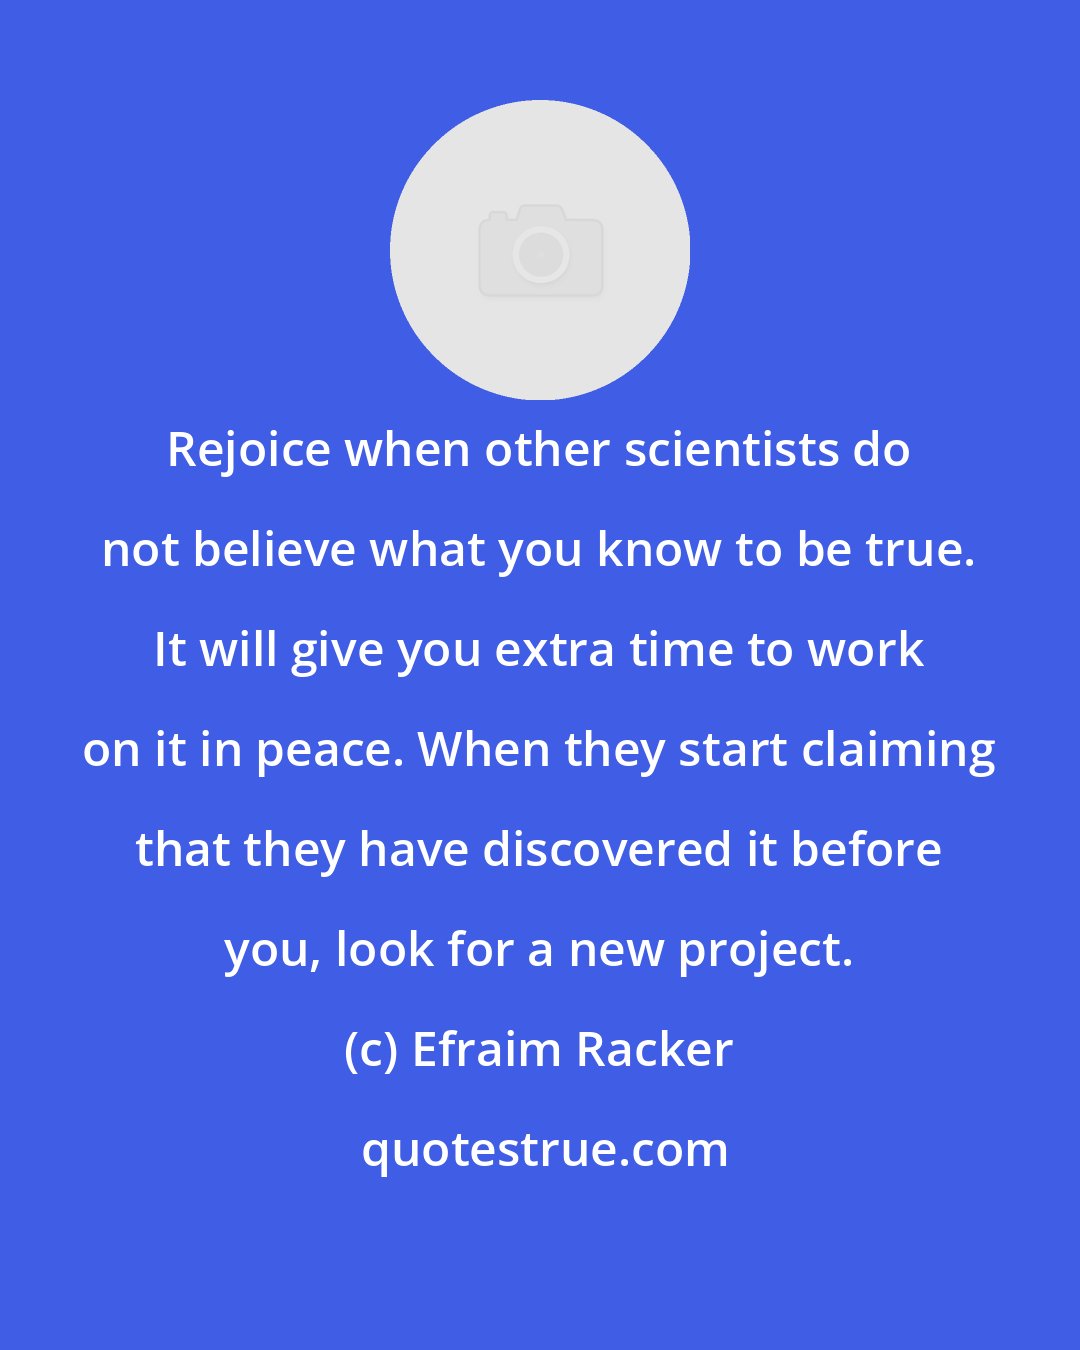 Efraim Racker: Rejoice when other scientists do not believe what you know to be true. It will give you extra time to work on it in peace. When they start claiming that they have discovered it before you, look for a new project.